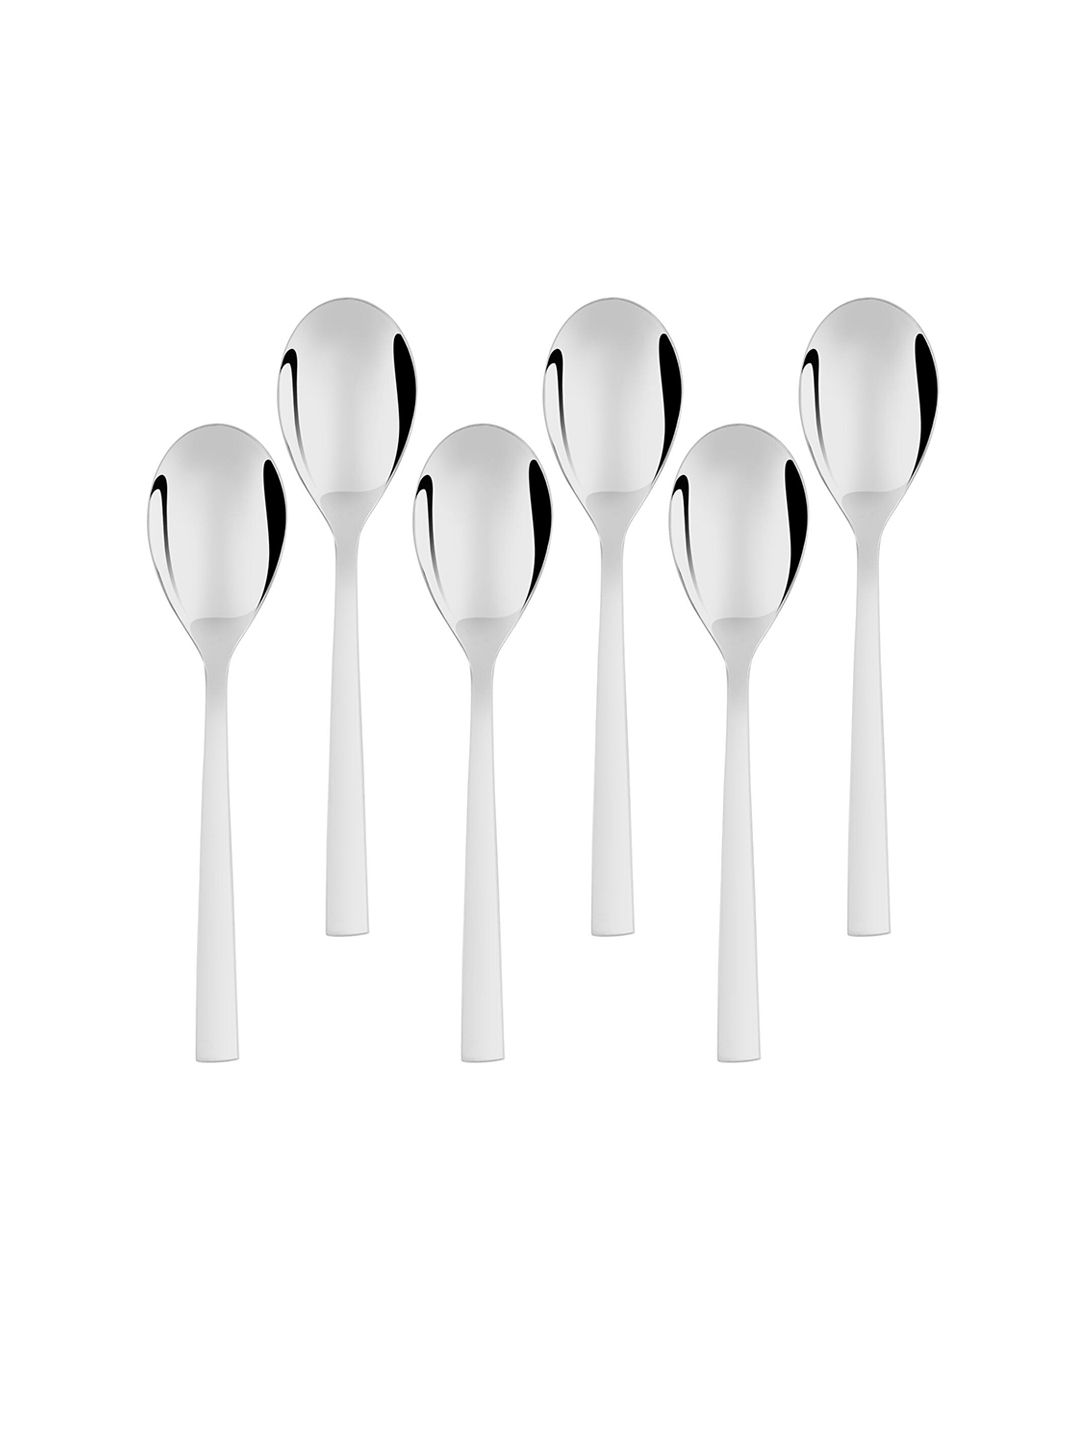 FNS Slimline 6 Pcs Stainless Steel Dinner Spoon Price in India